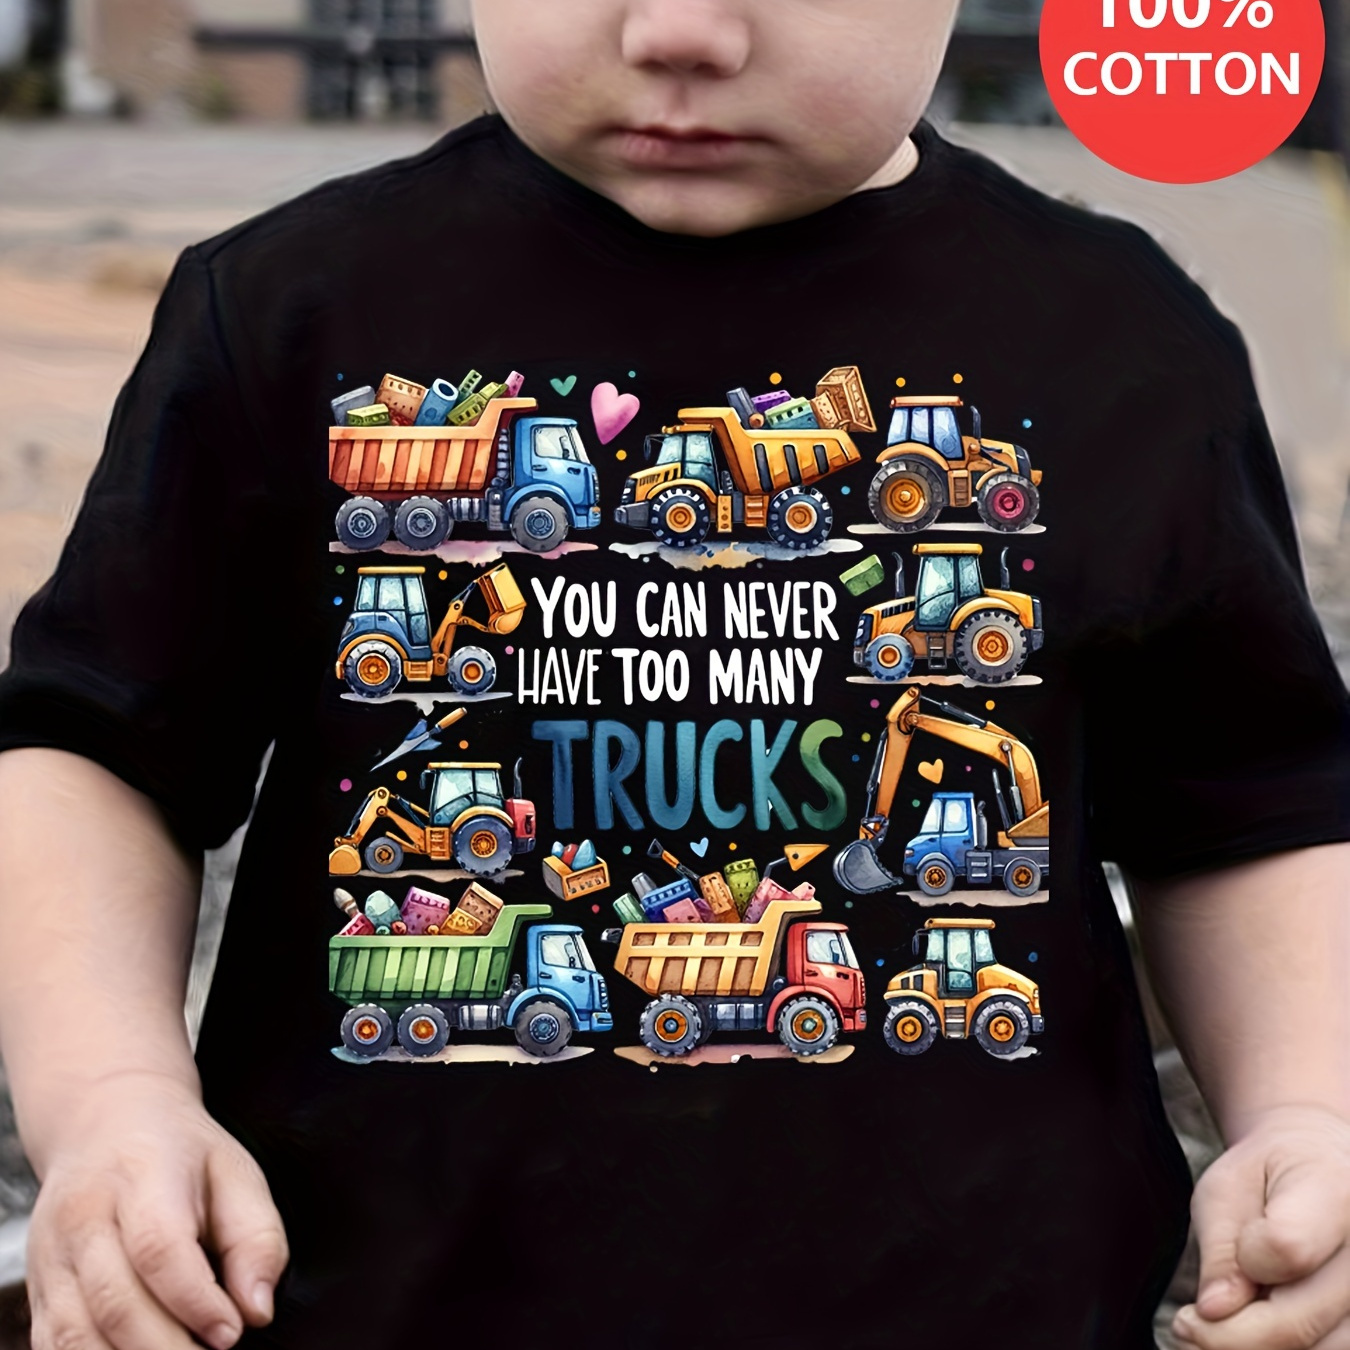 

100% Cotton Cute Cartoon Print T-shirt- Engaging Visuals, Casual Short Sleeve T-shirts For Boys - Cool, Lightweight And Comfy Summer Clothes!